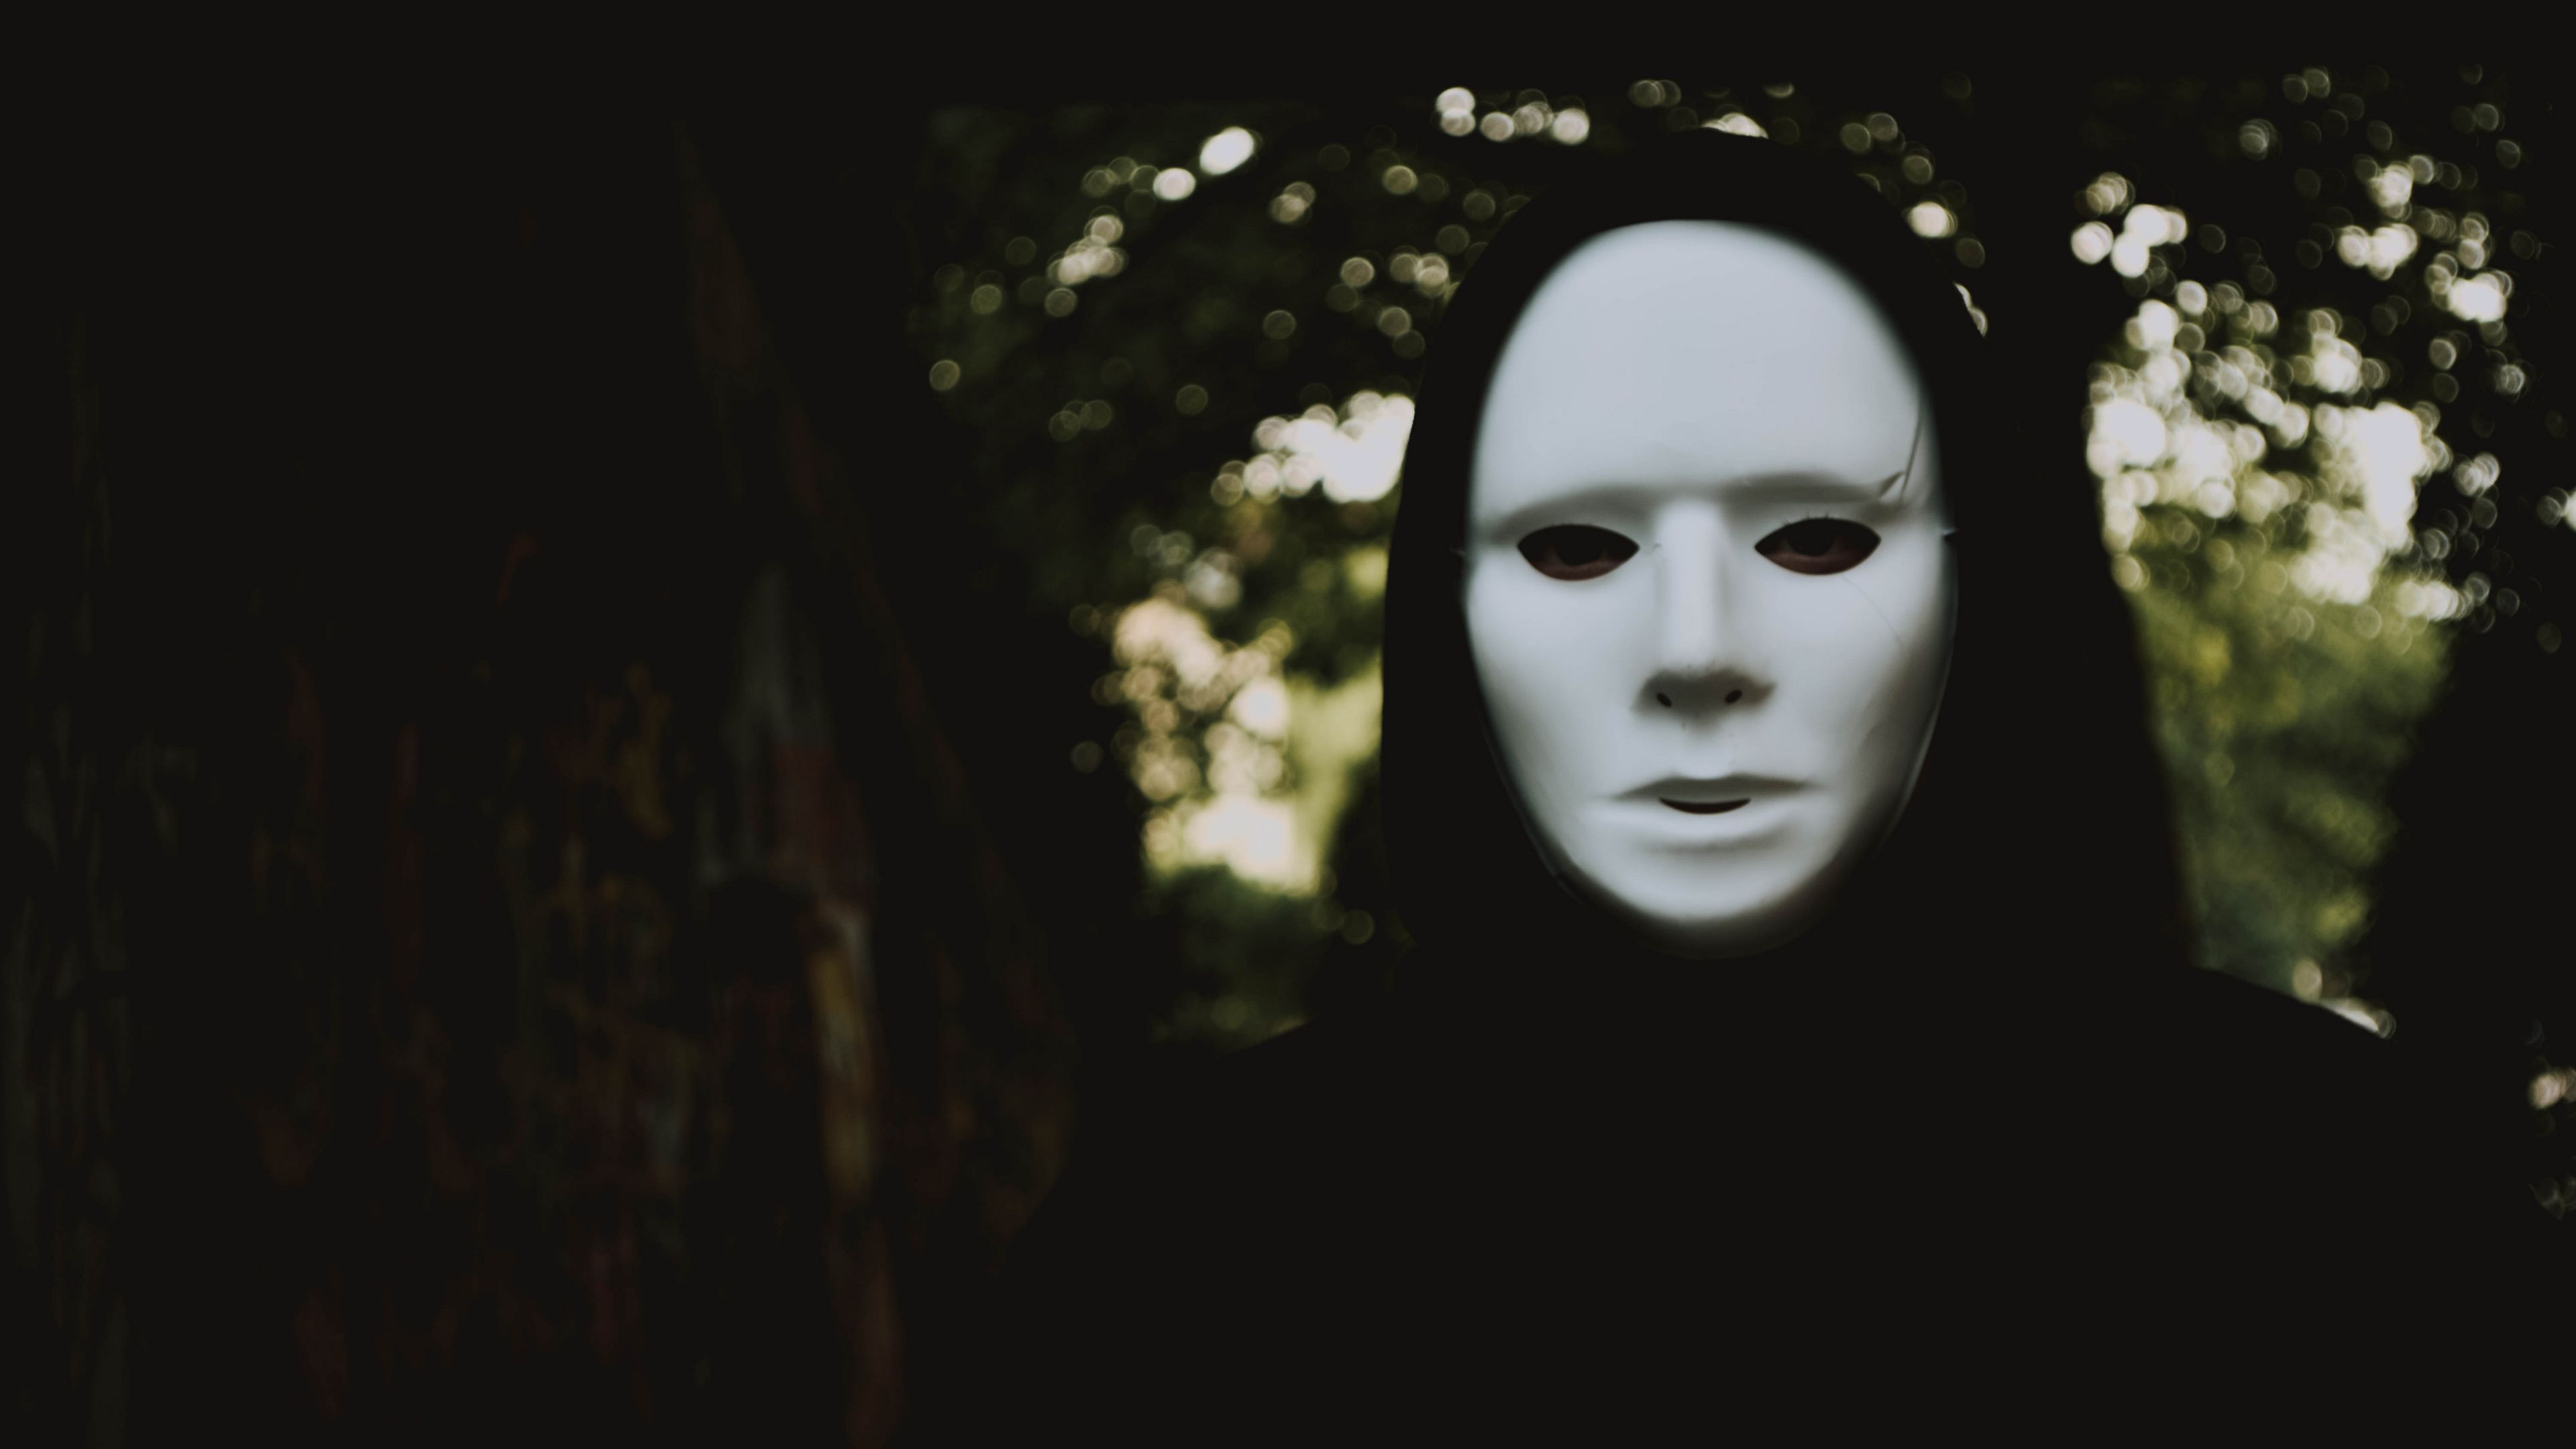 Download wallpaper 3840x2160 human, mask, face, unknown 4k uhd 16:9 HD background